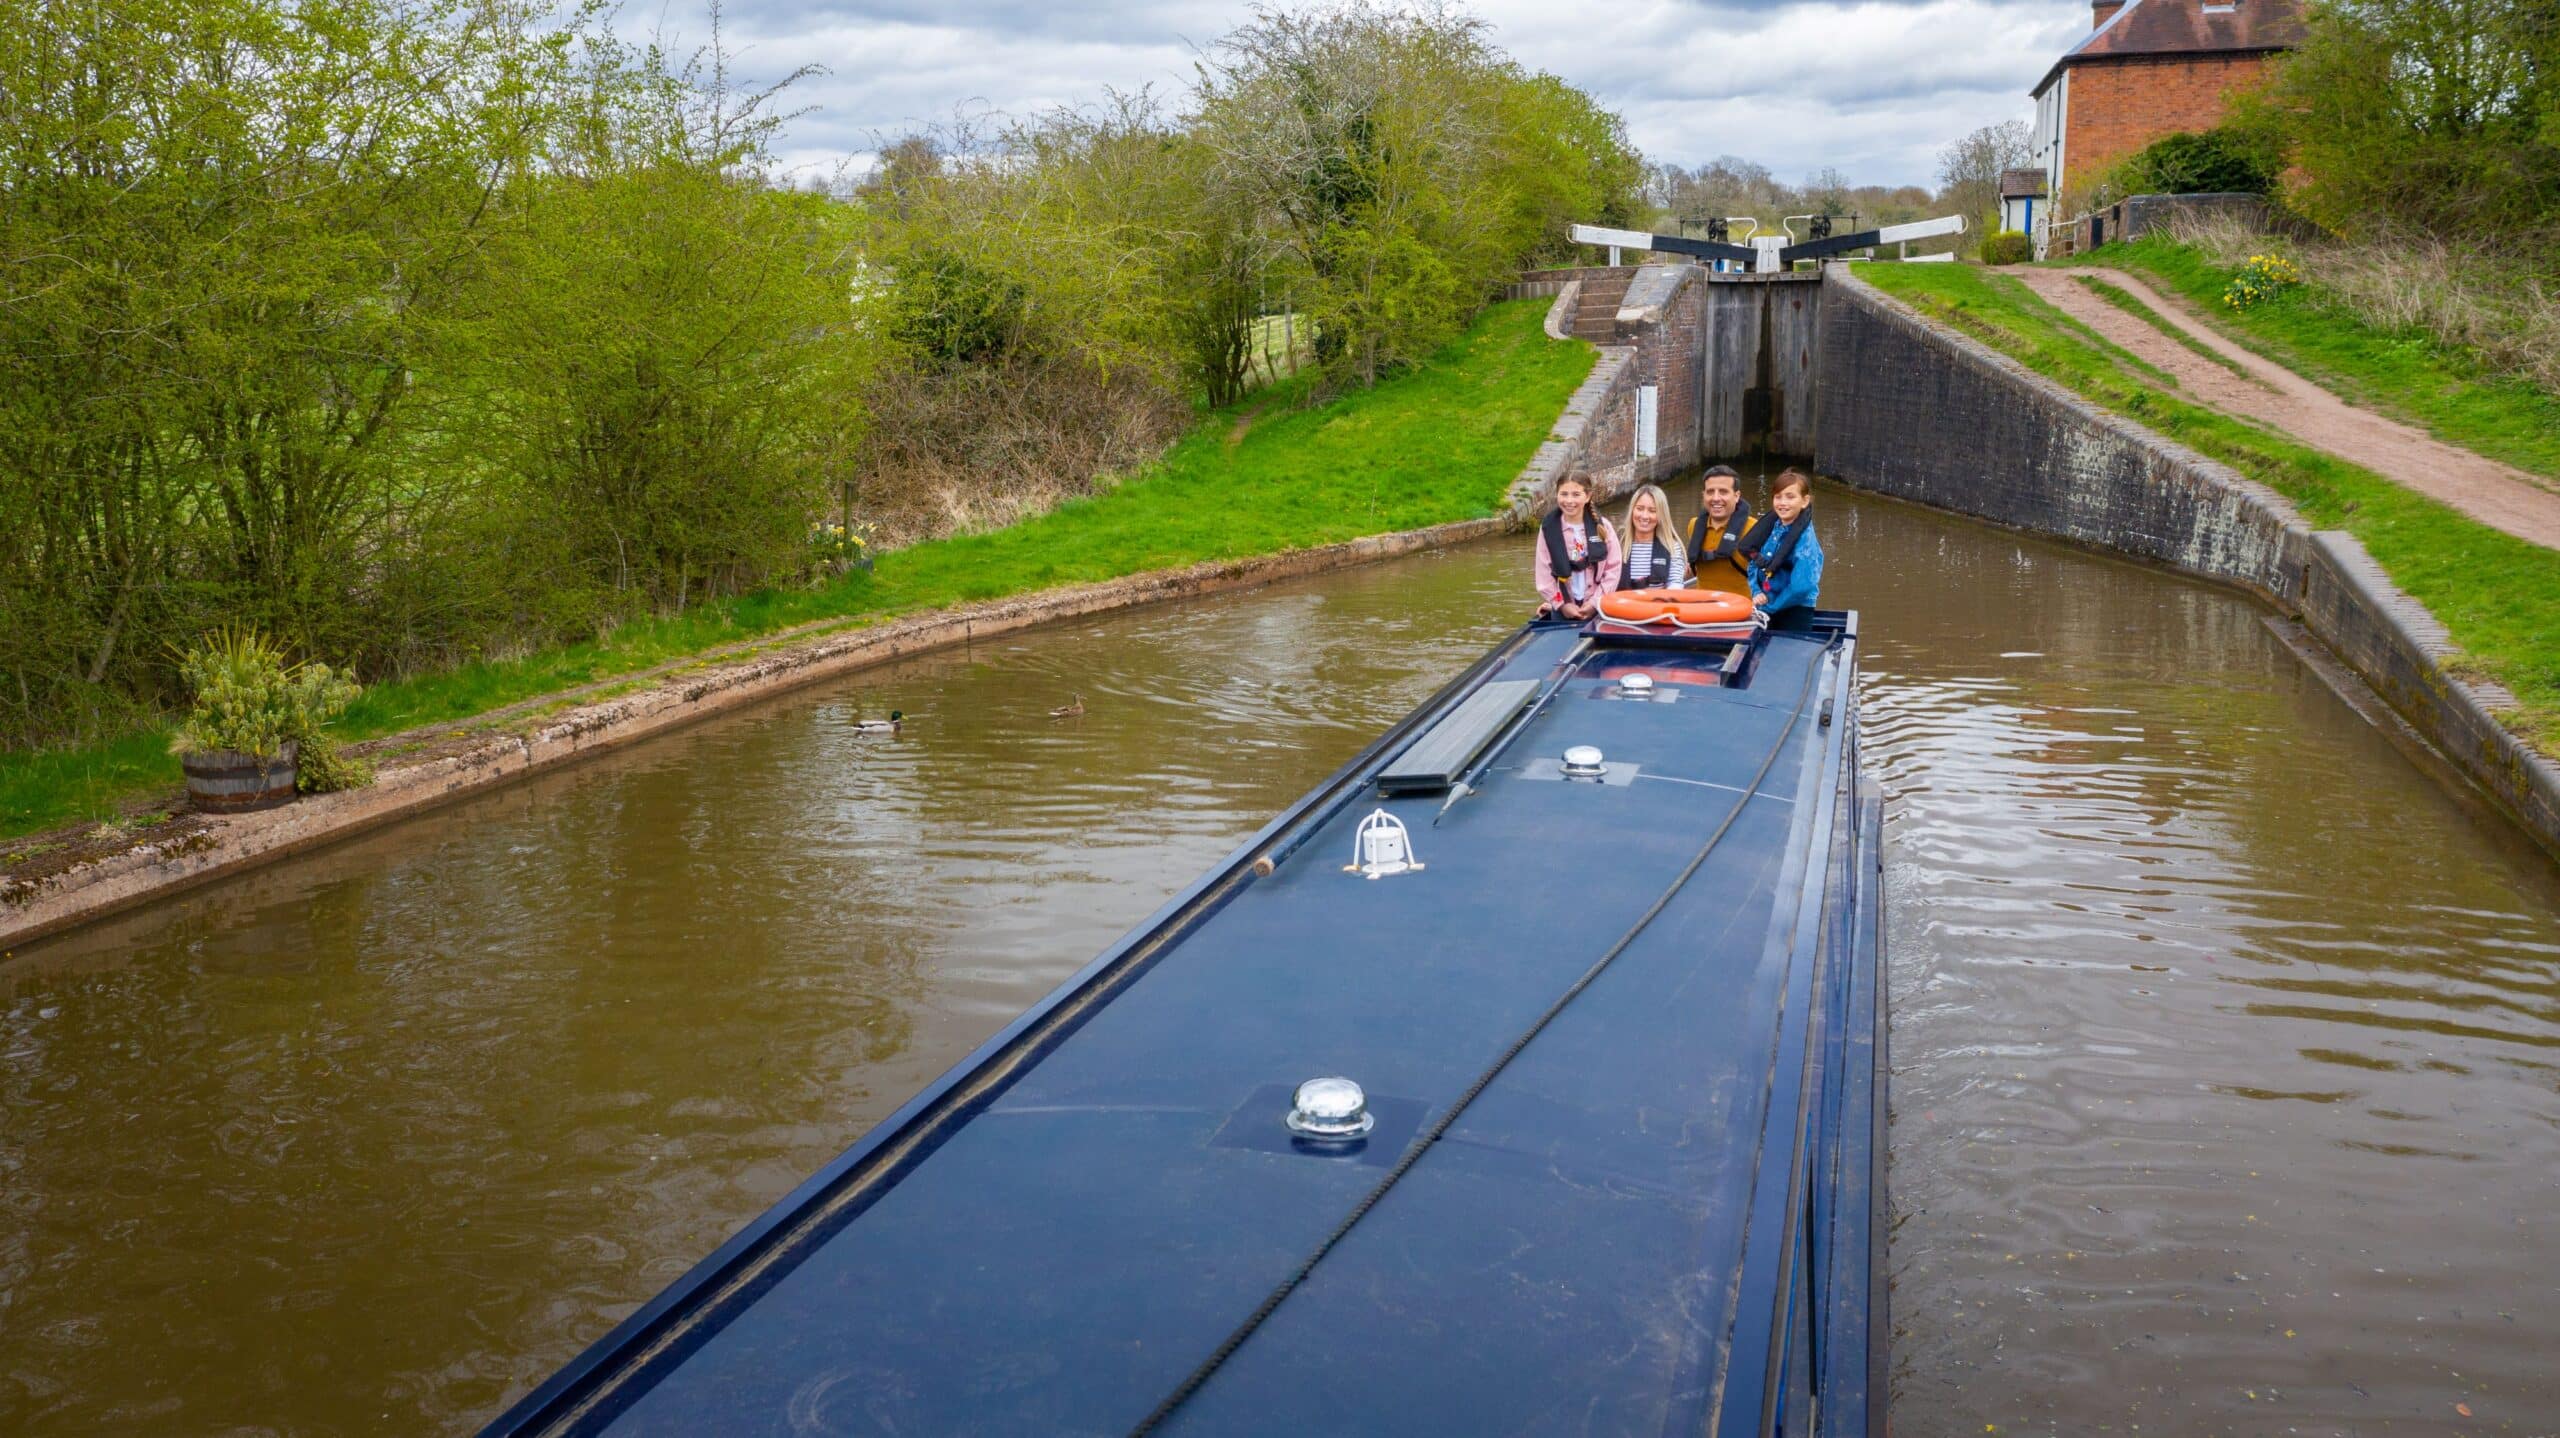 Spotlight on the canals – the Worcester & Birmingham Canal